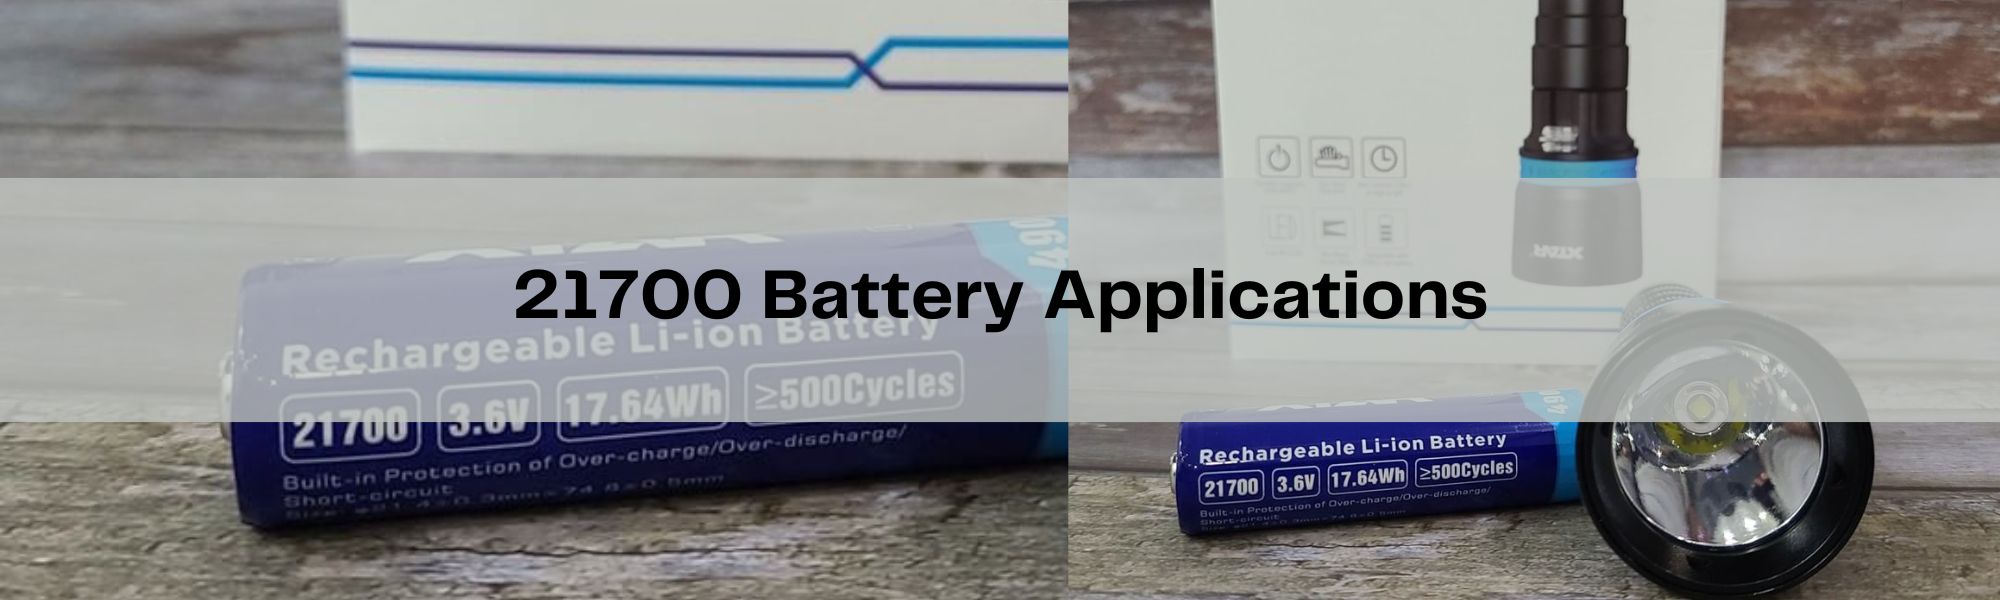 21700 battery applications in flashlight, electric car, power bank, etc.